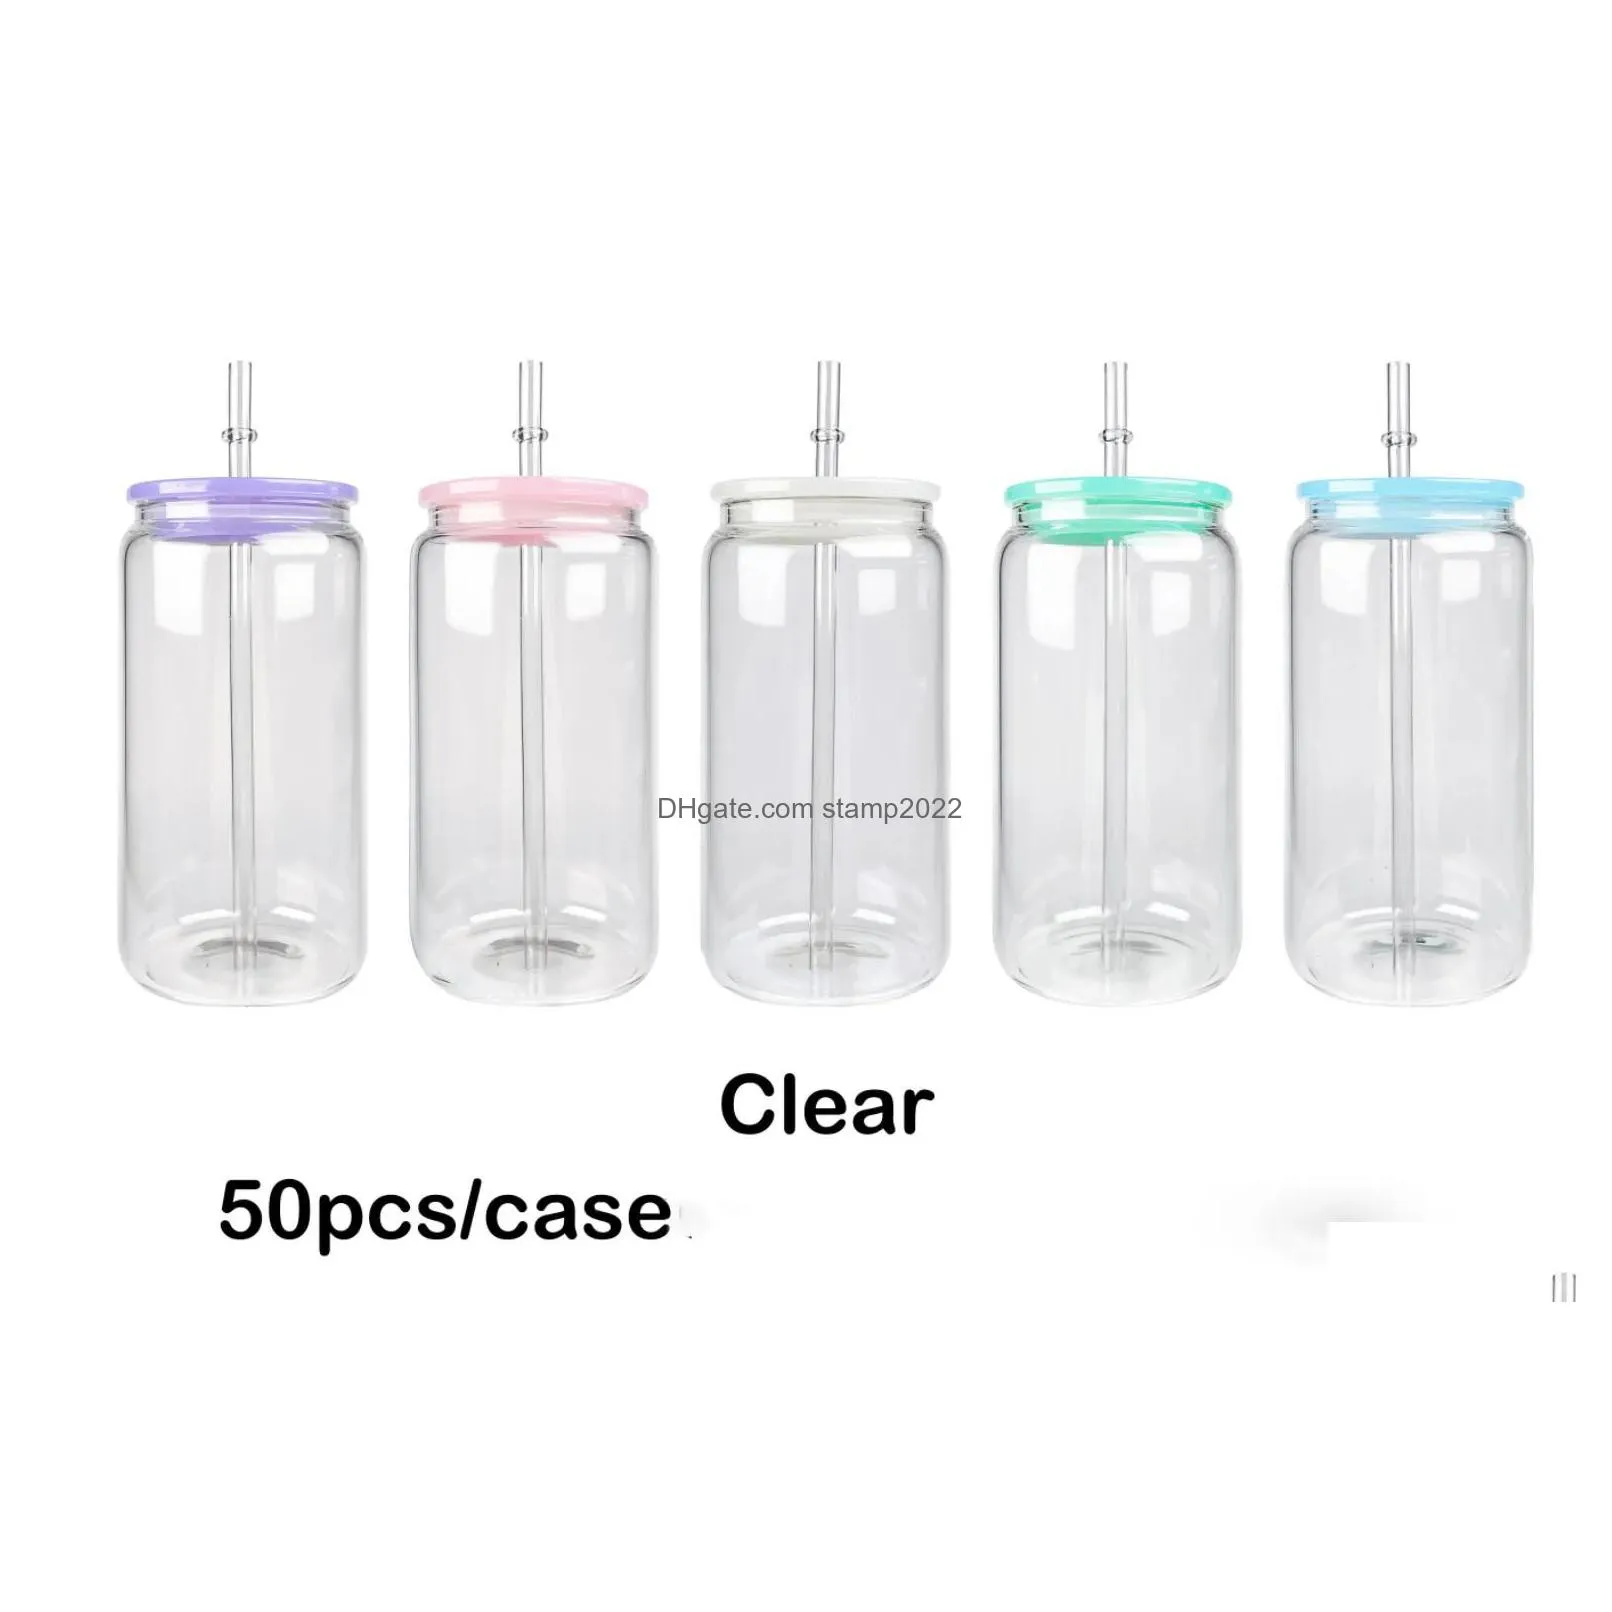 colorful lids for 16oz glass jar waterproof seal cover plastic cover fits glass beer mugs drinking glasses